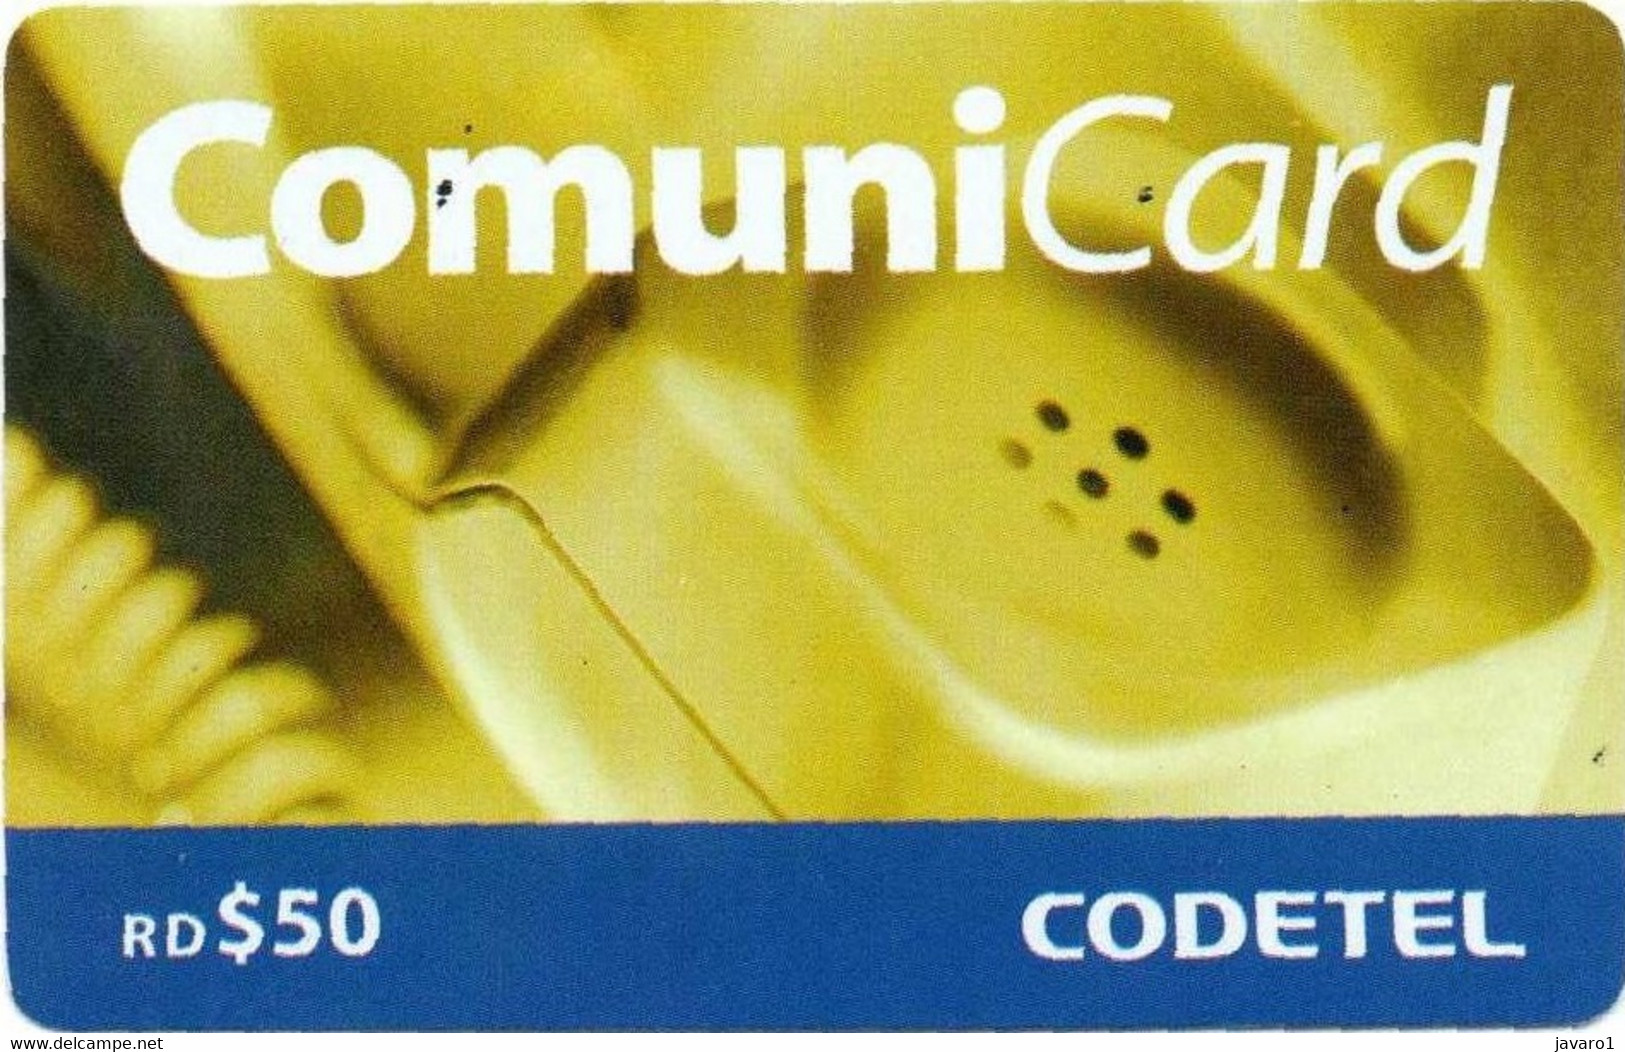 CODETEL : DMC108A RD$50 Yellow Telephone Receiver USED - Dominicaanse Republiek